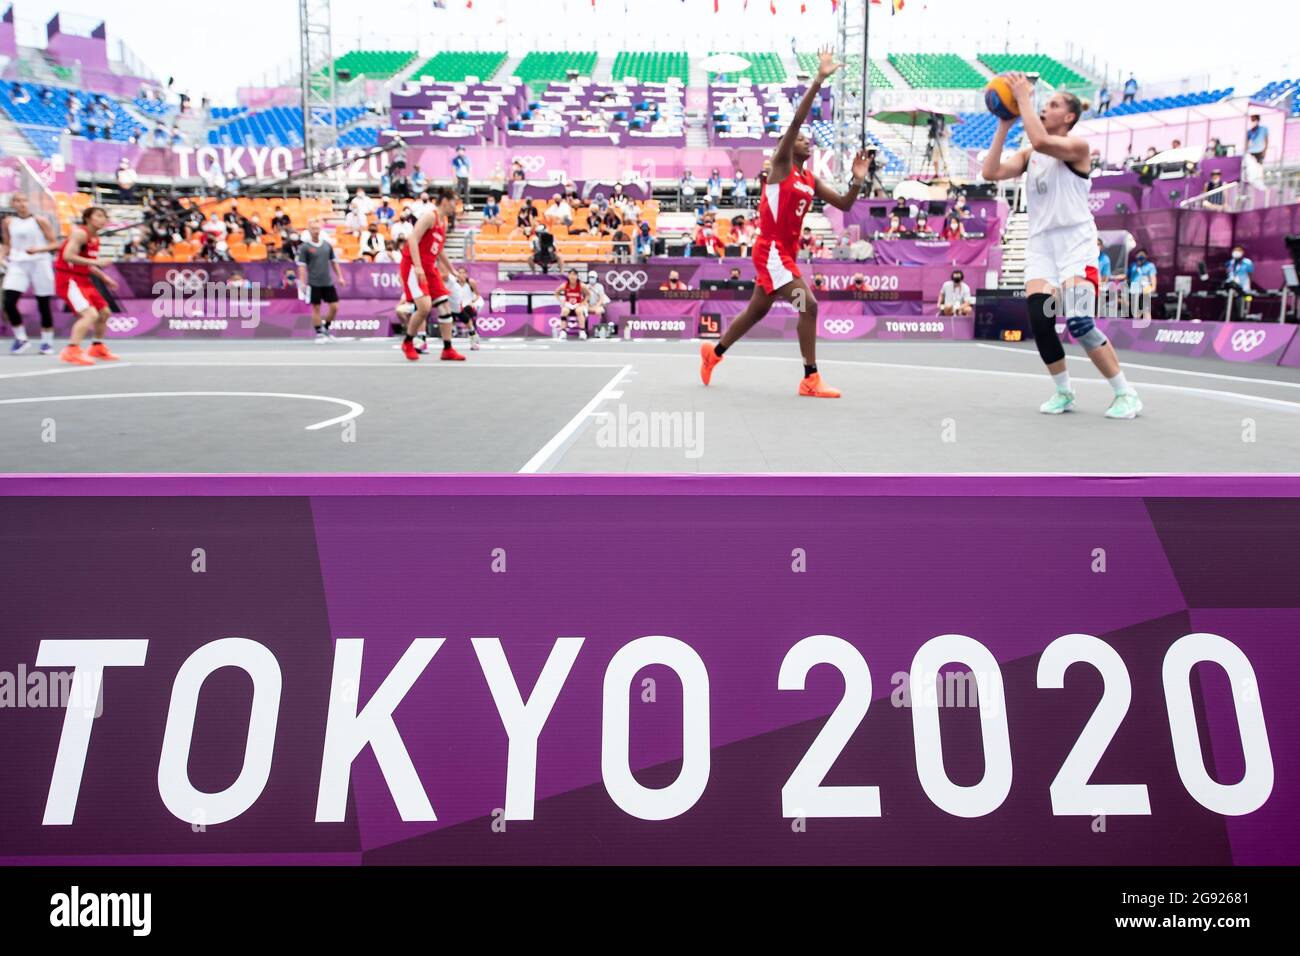 Tokyo, Japan. 24th July, 2021. Football: Women's Olympics, Russian Olymp. Committee (ROC) - Japan, preliminary round, at Aomi Urban Sports Park. The TOKYO 2020 logo is seen in front of the players. Credit: Swen Pförtner/dpa/Alamy Live News Stock Photo